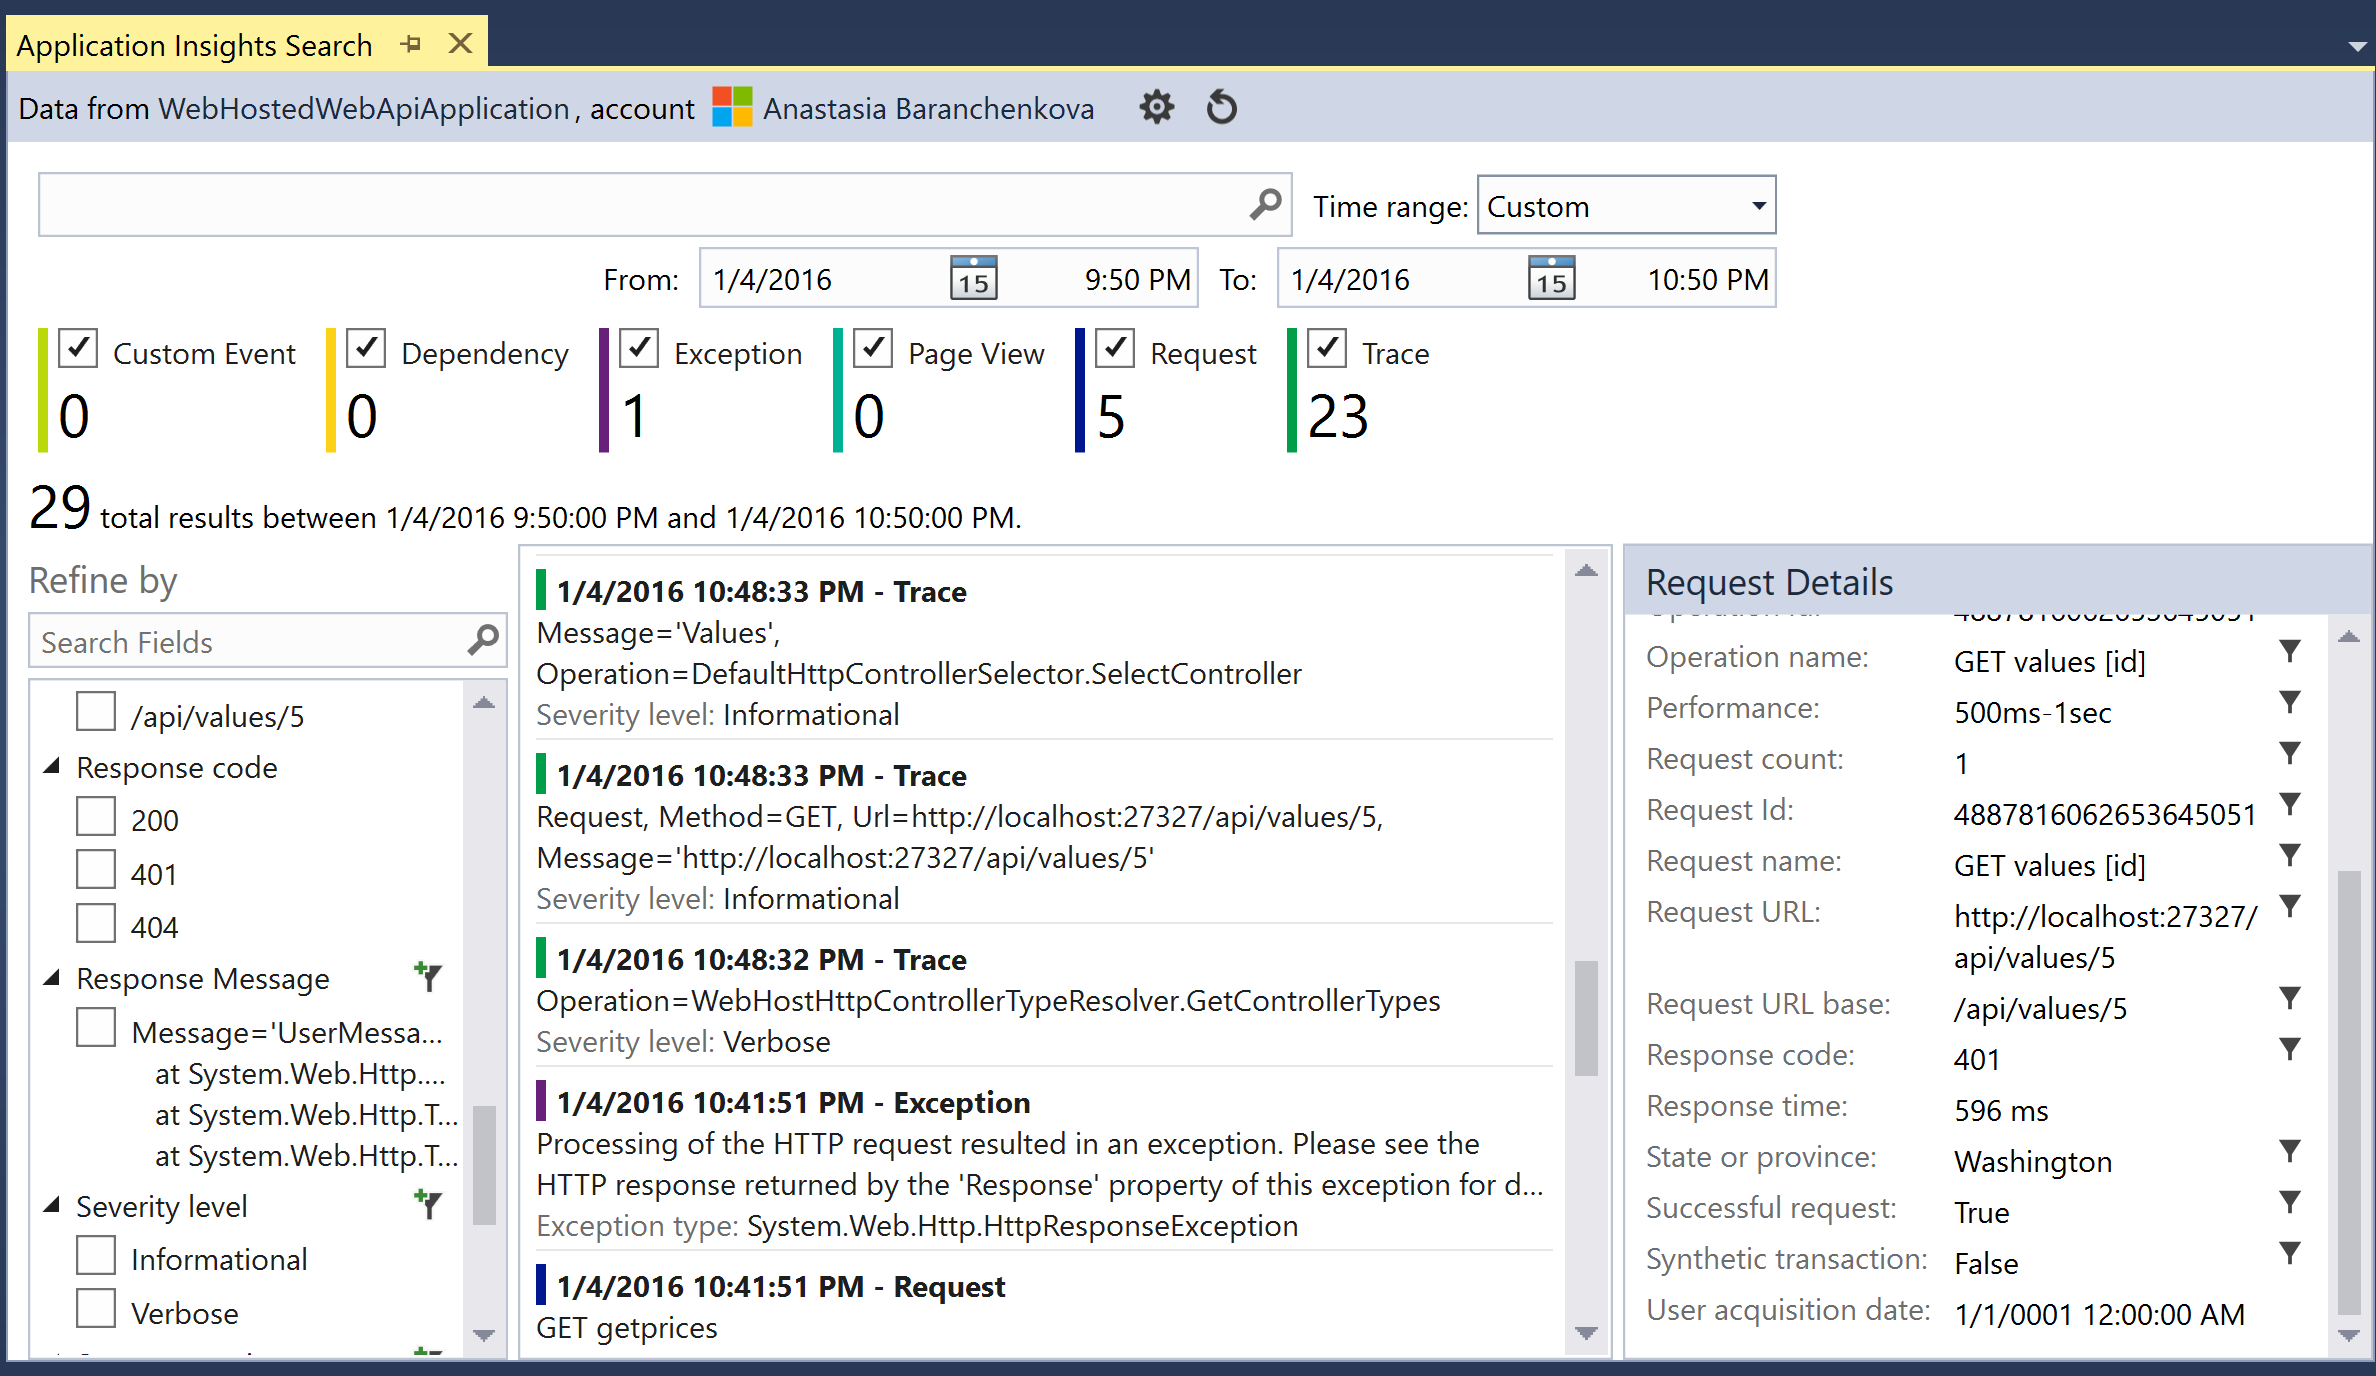 Application Insights Search windows